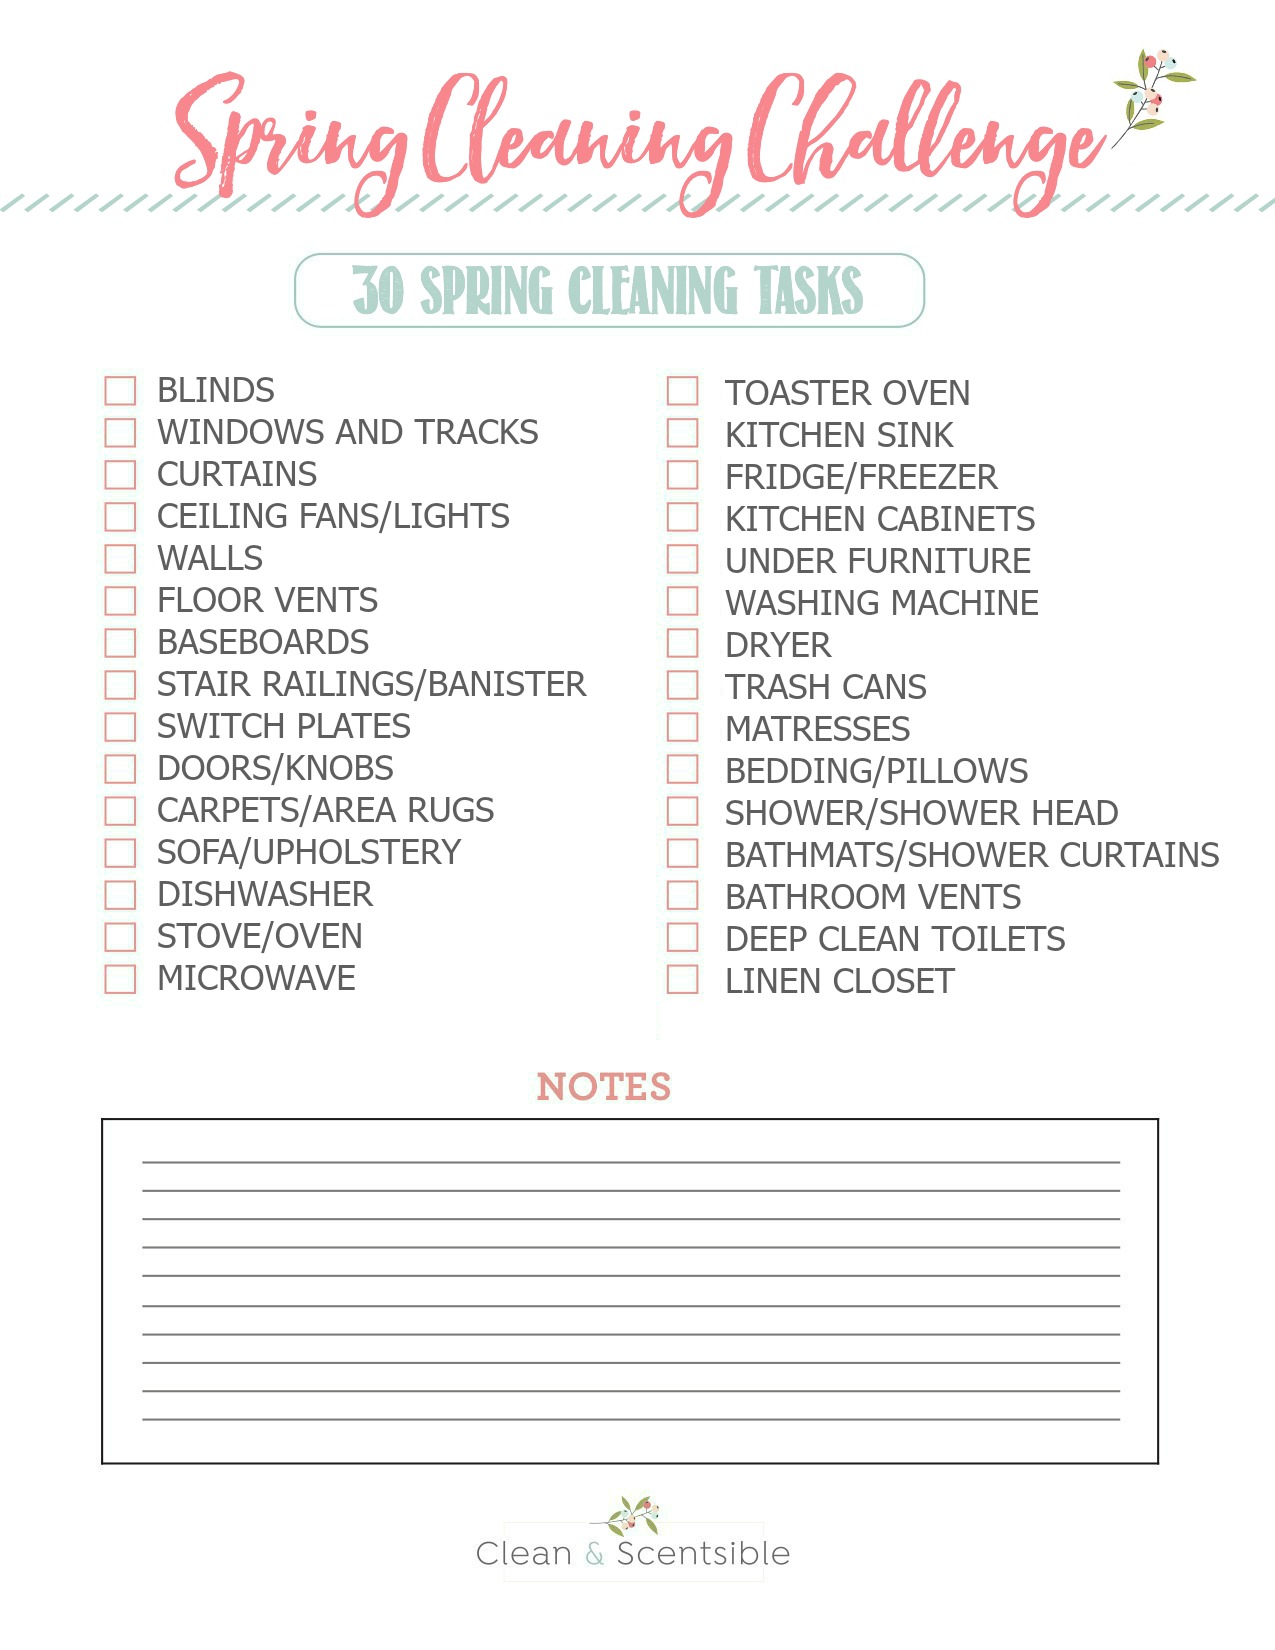 spring-cleaning-checklist-30-items-to-spring-clean-clean-and-scentsible